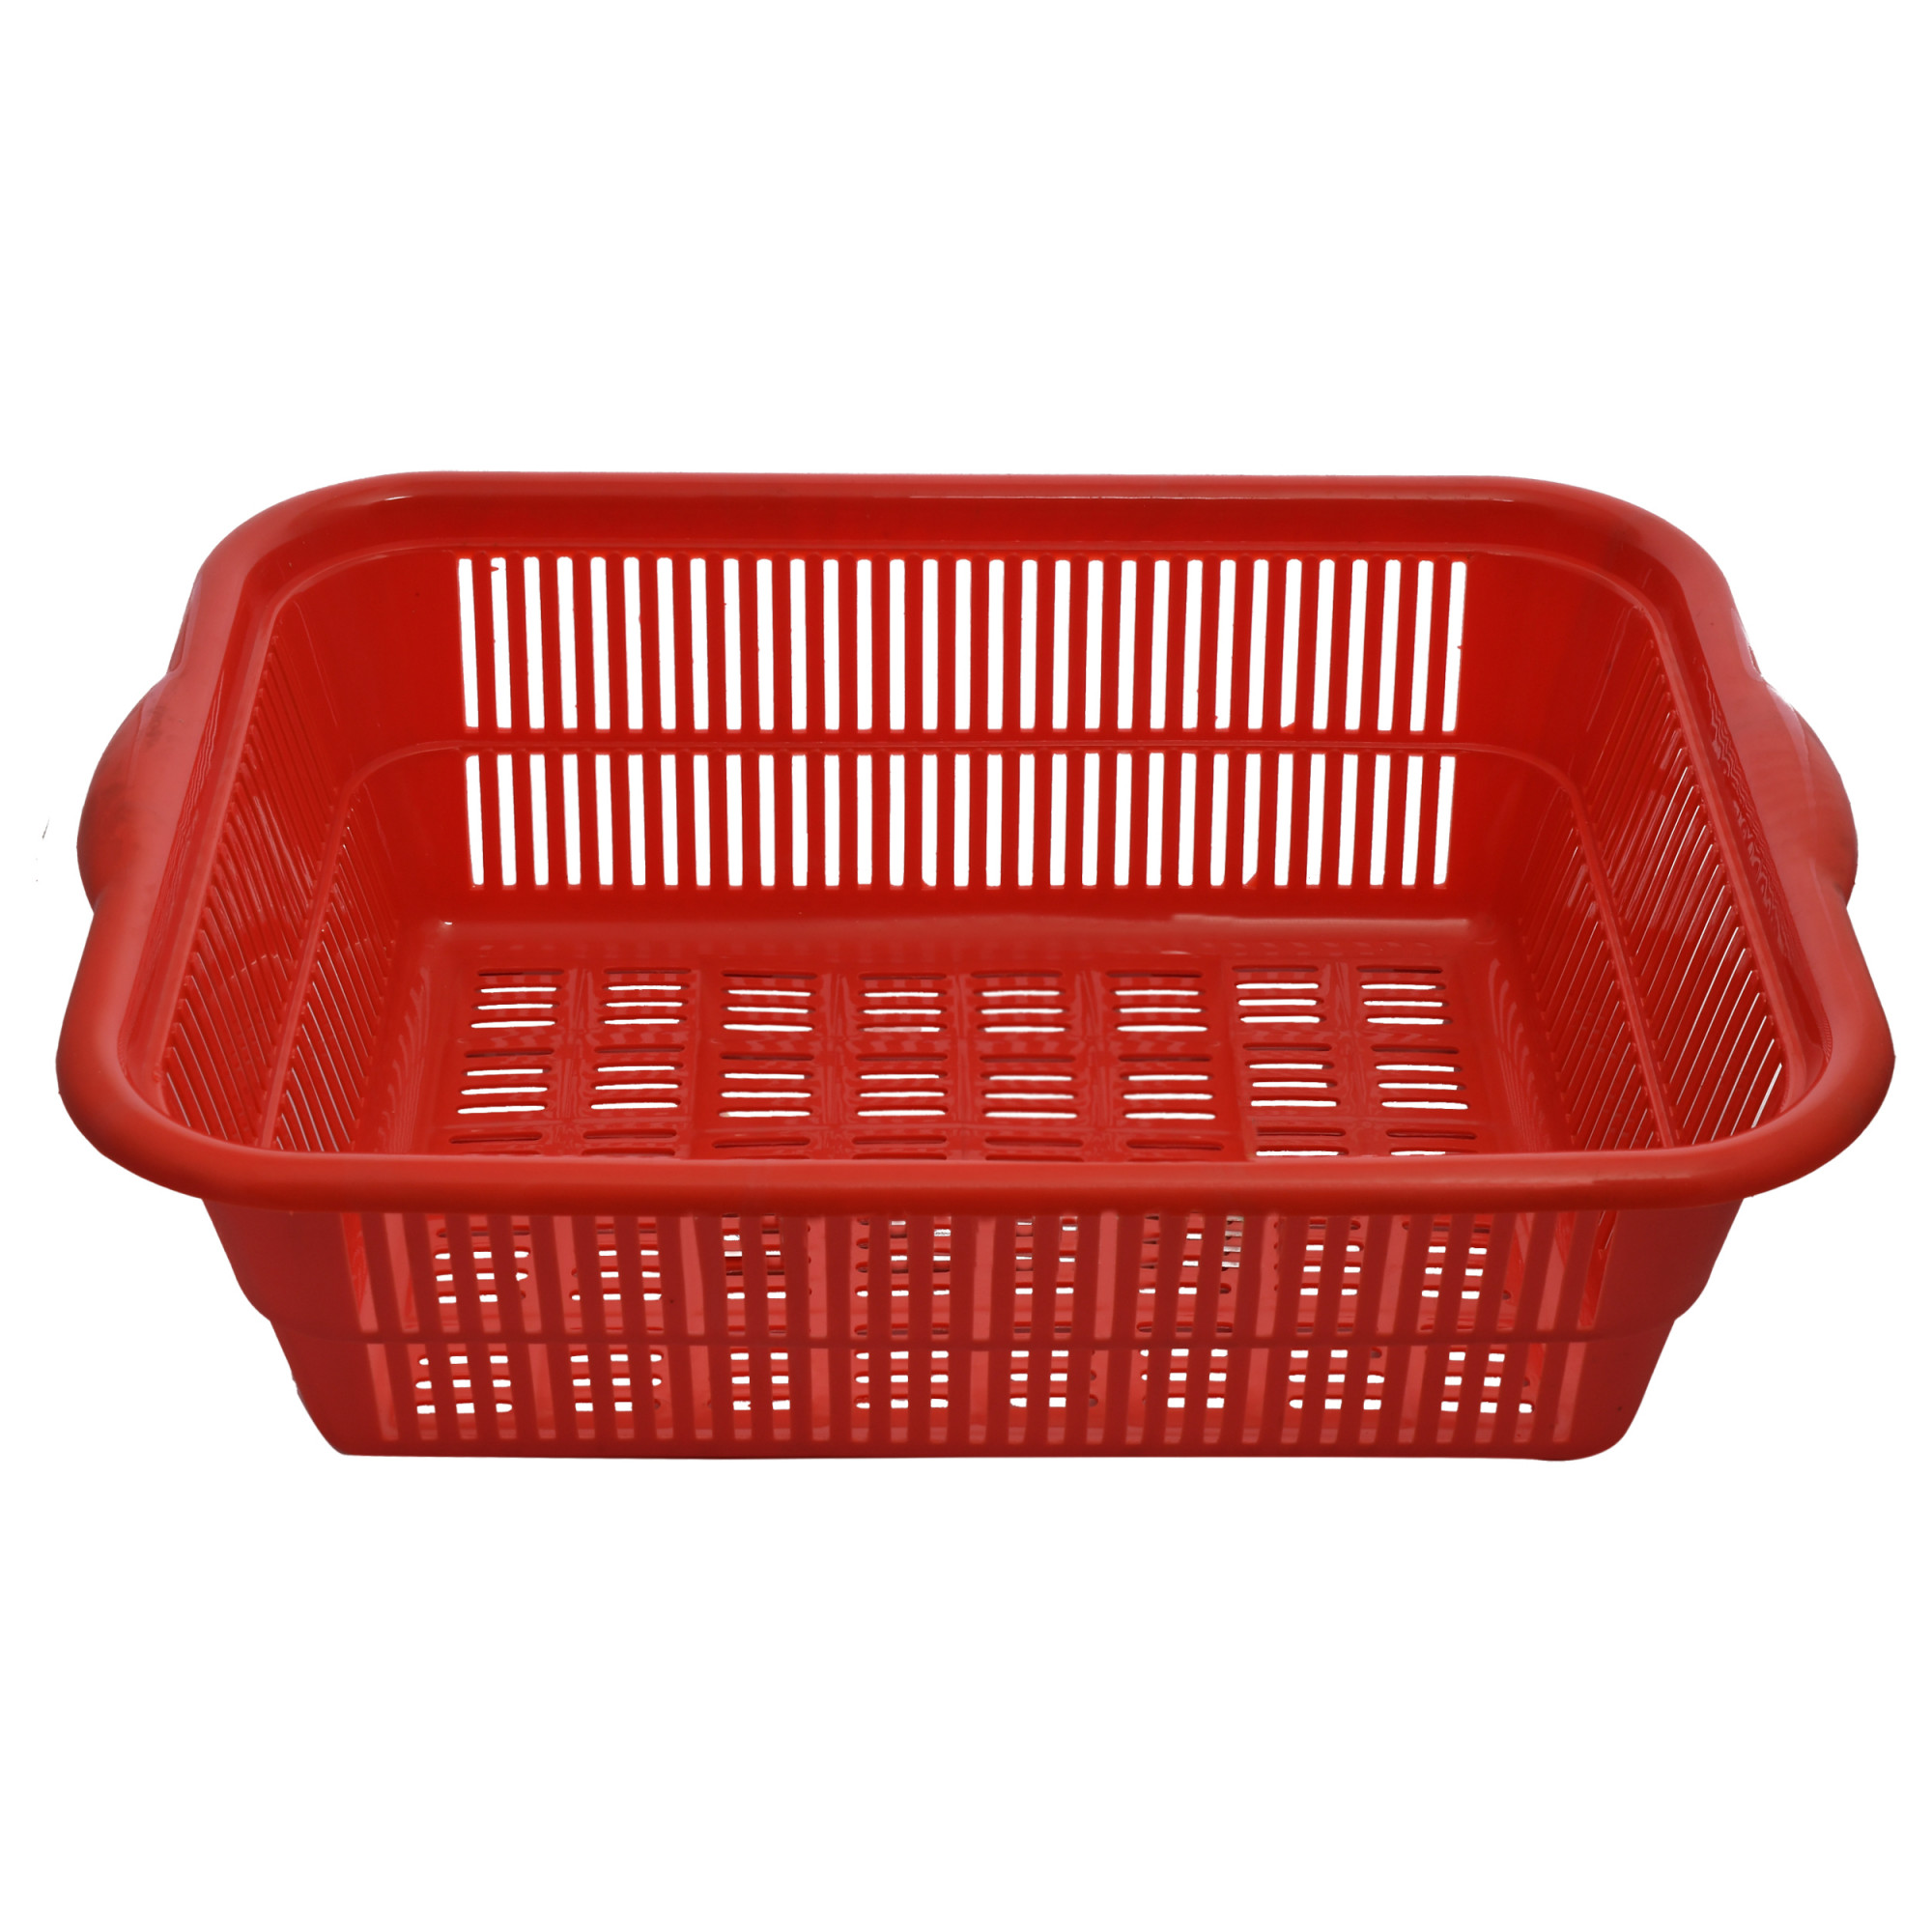 Kuber Industries Plastic Kitchen Dish Rack Drainer Vegetables And Fruits Basket Dish Rack Multipurpose Organizers ,Small Size,Green & Red